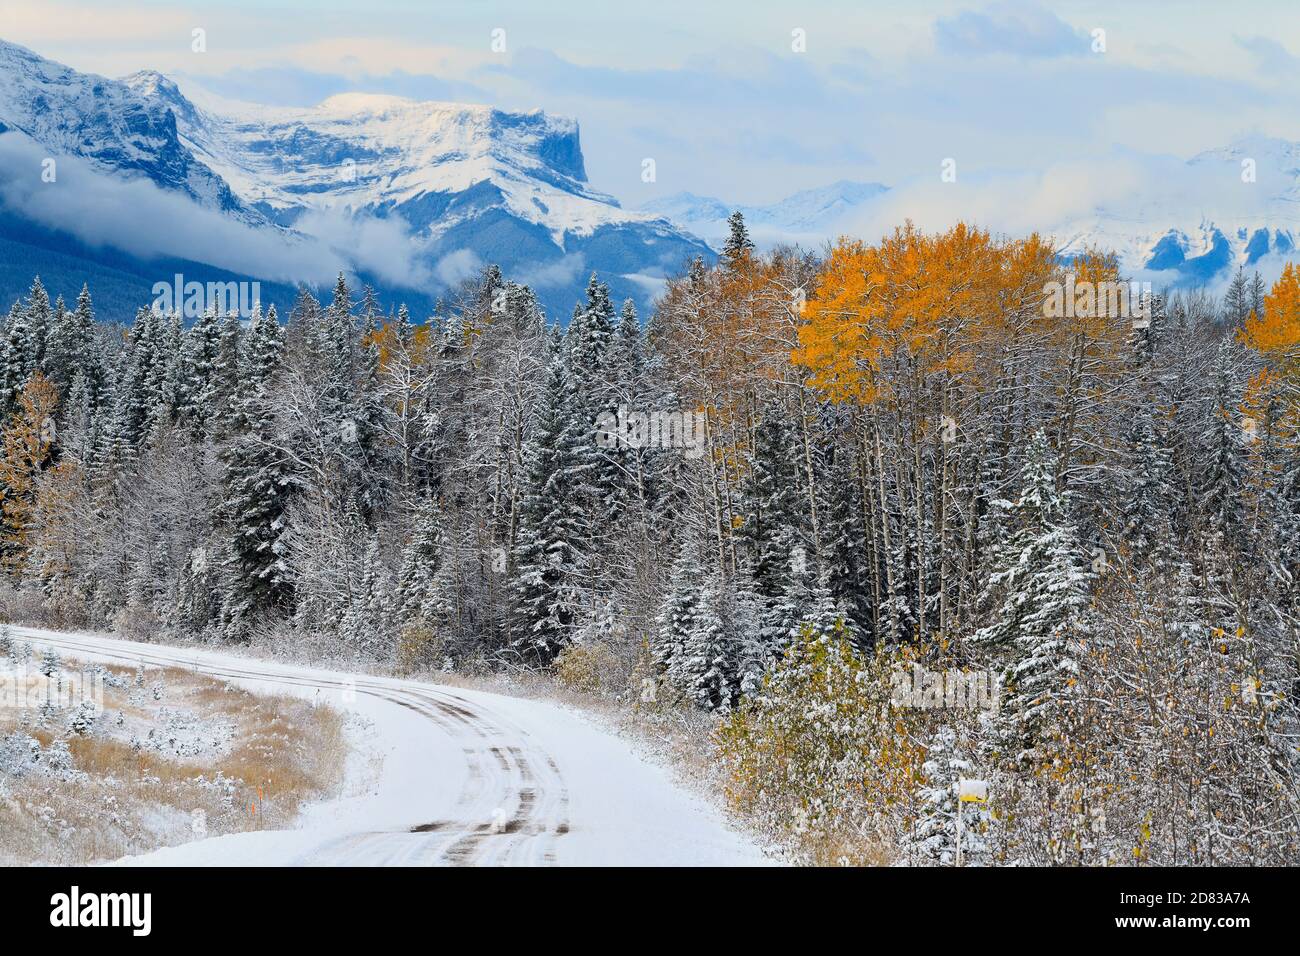 A landscape image of the first snowfall of the season on the rocky mountains in Jasper National Park in Alberta Canada. Stock Photo